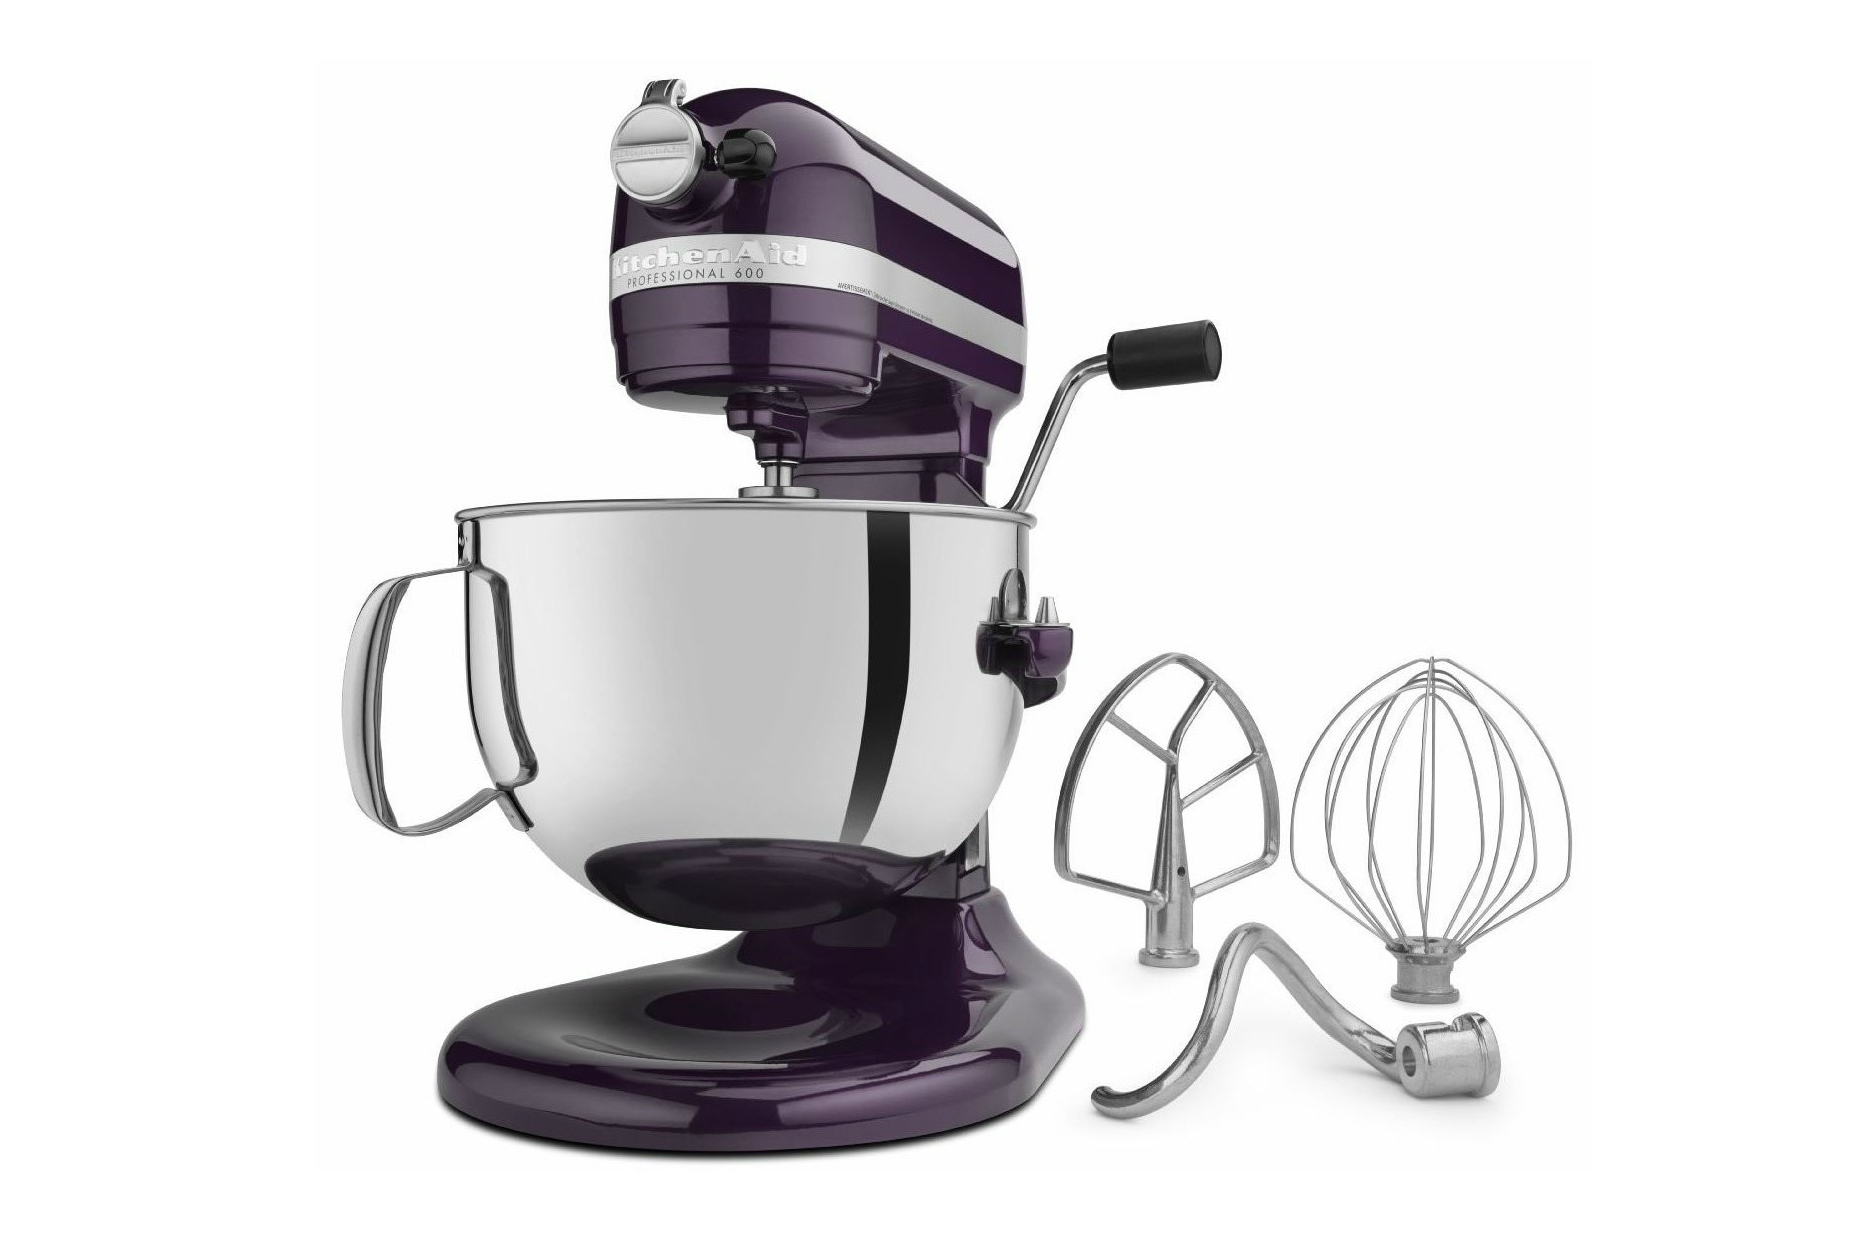 This KitchenAid stand mixer is discounted for Prime Day